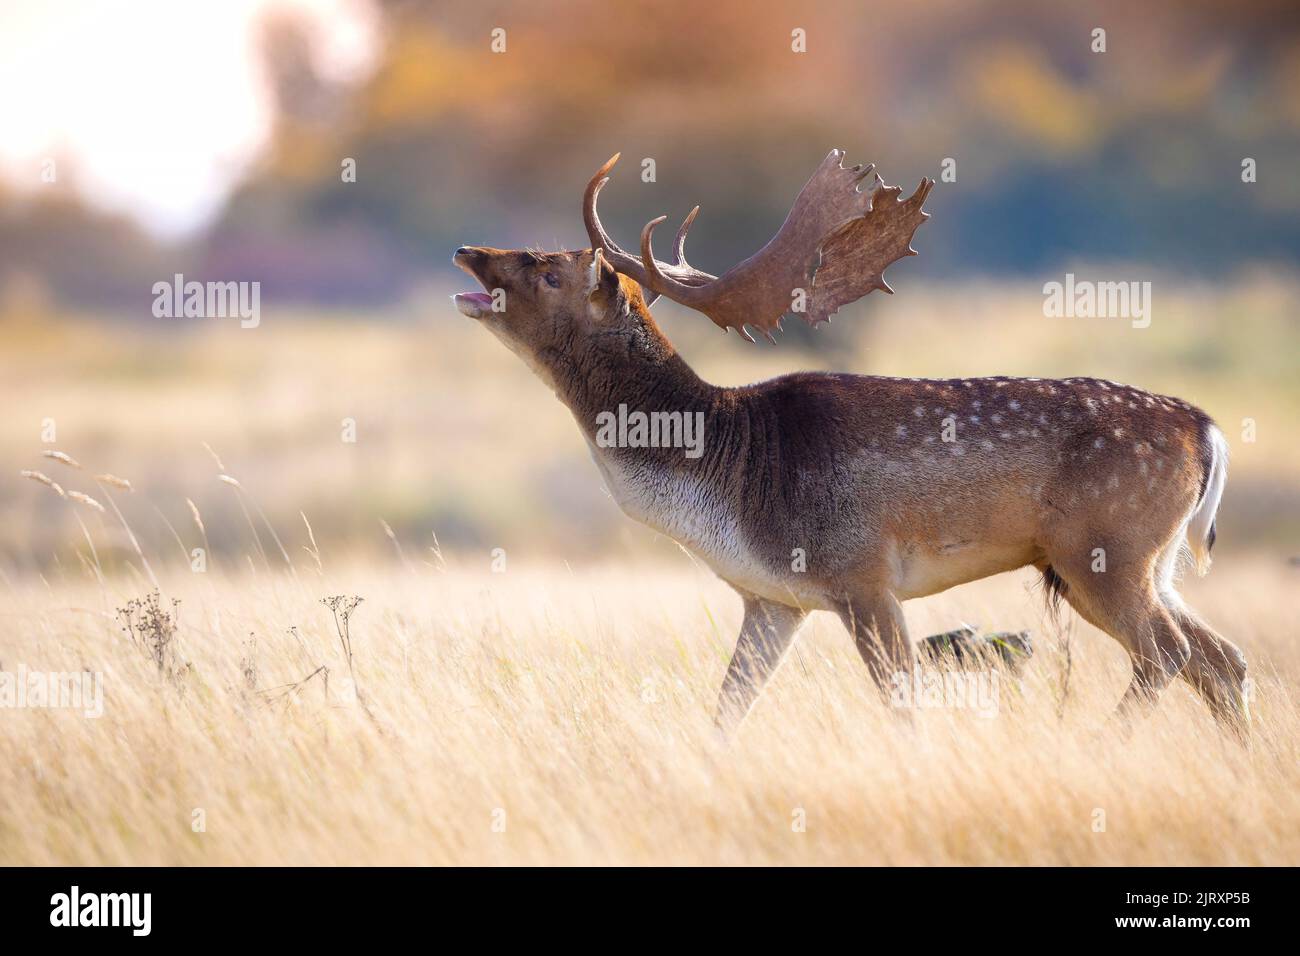 Fallow deer Dama Dama male stag with big antlers during rutting season. The Autumn sunlight and nature colors are clearly visible on the background. Stock Photo